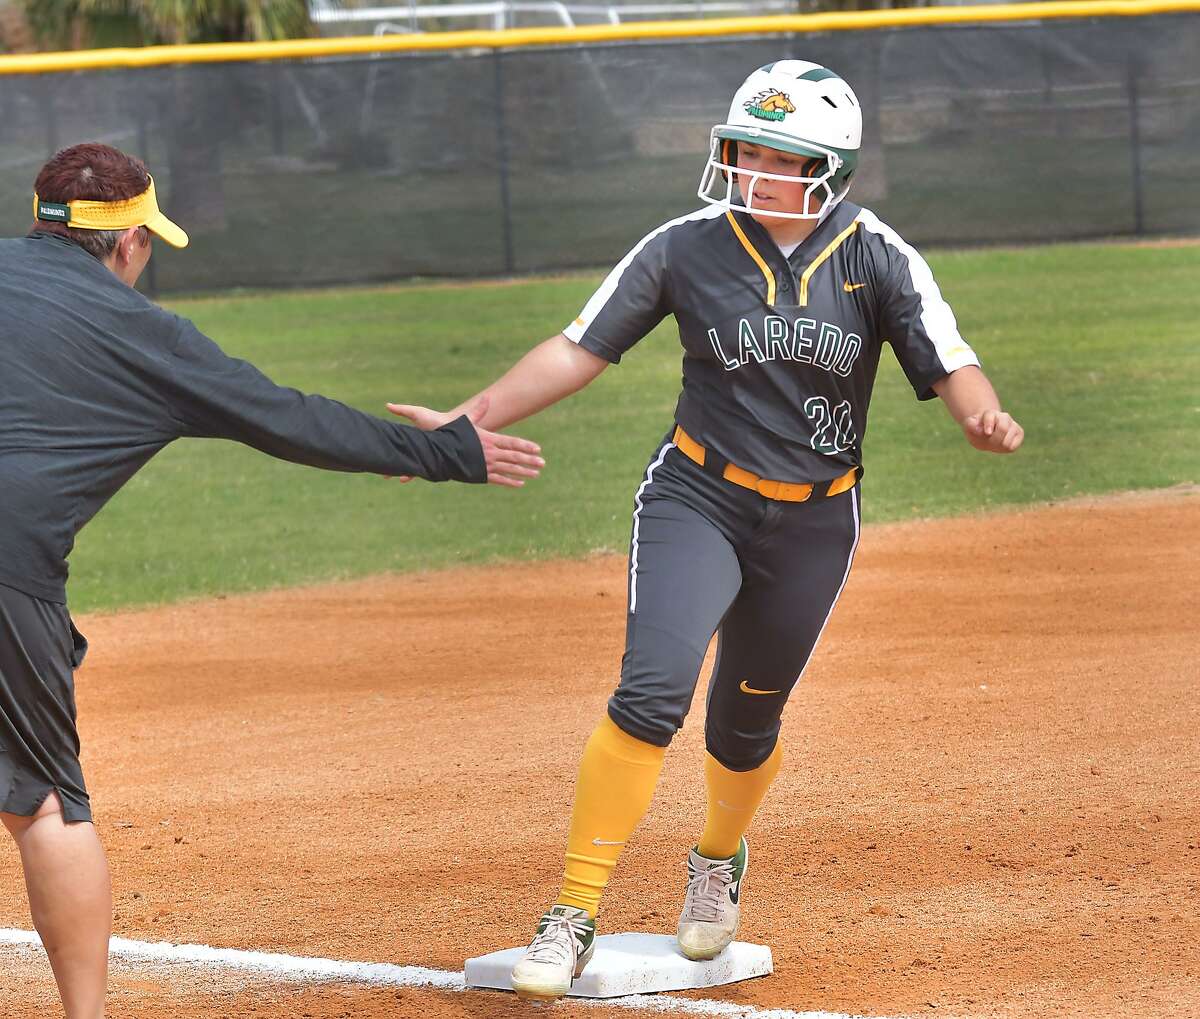 The Laredo College softball team split its doubleheader against Coastal Bend to move into a three-way tie for fifth place in the Region XIV South Zone Division.